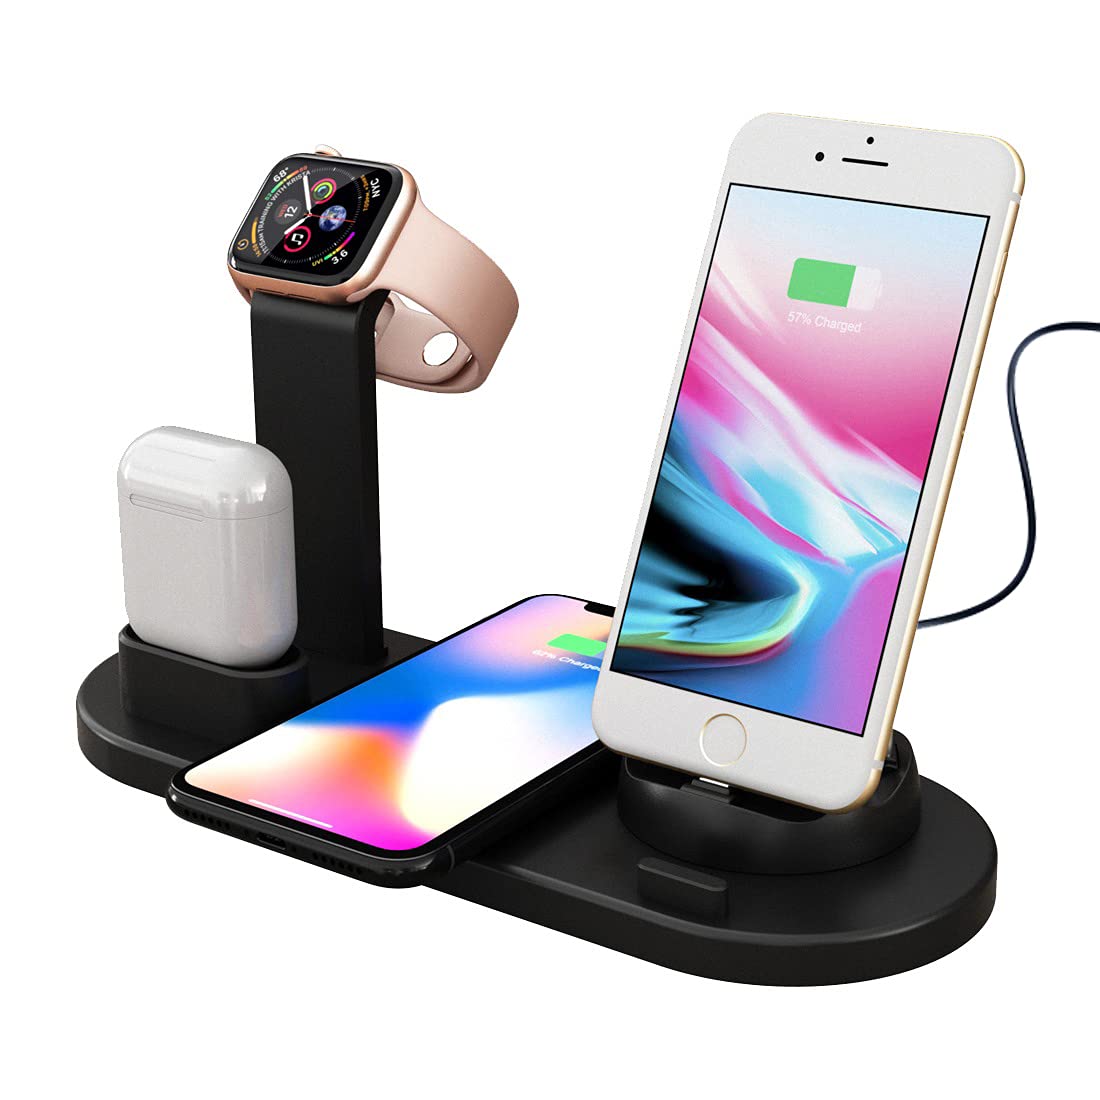 Wireless Charger Stand, 6 in 1 Multi-Function Wireless Charging Station Dock  for Apple Watch Airpods, Qi Fast Wireless Charger Holder Pad for iPhone 11  Pro Max X XS XR and Smartphone